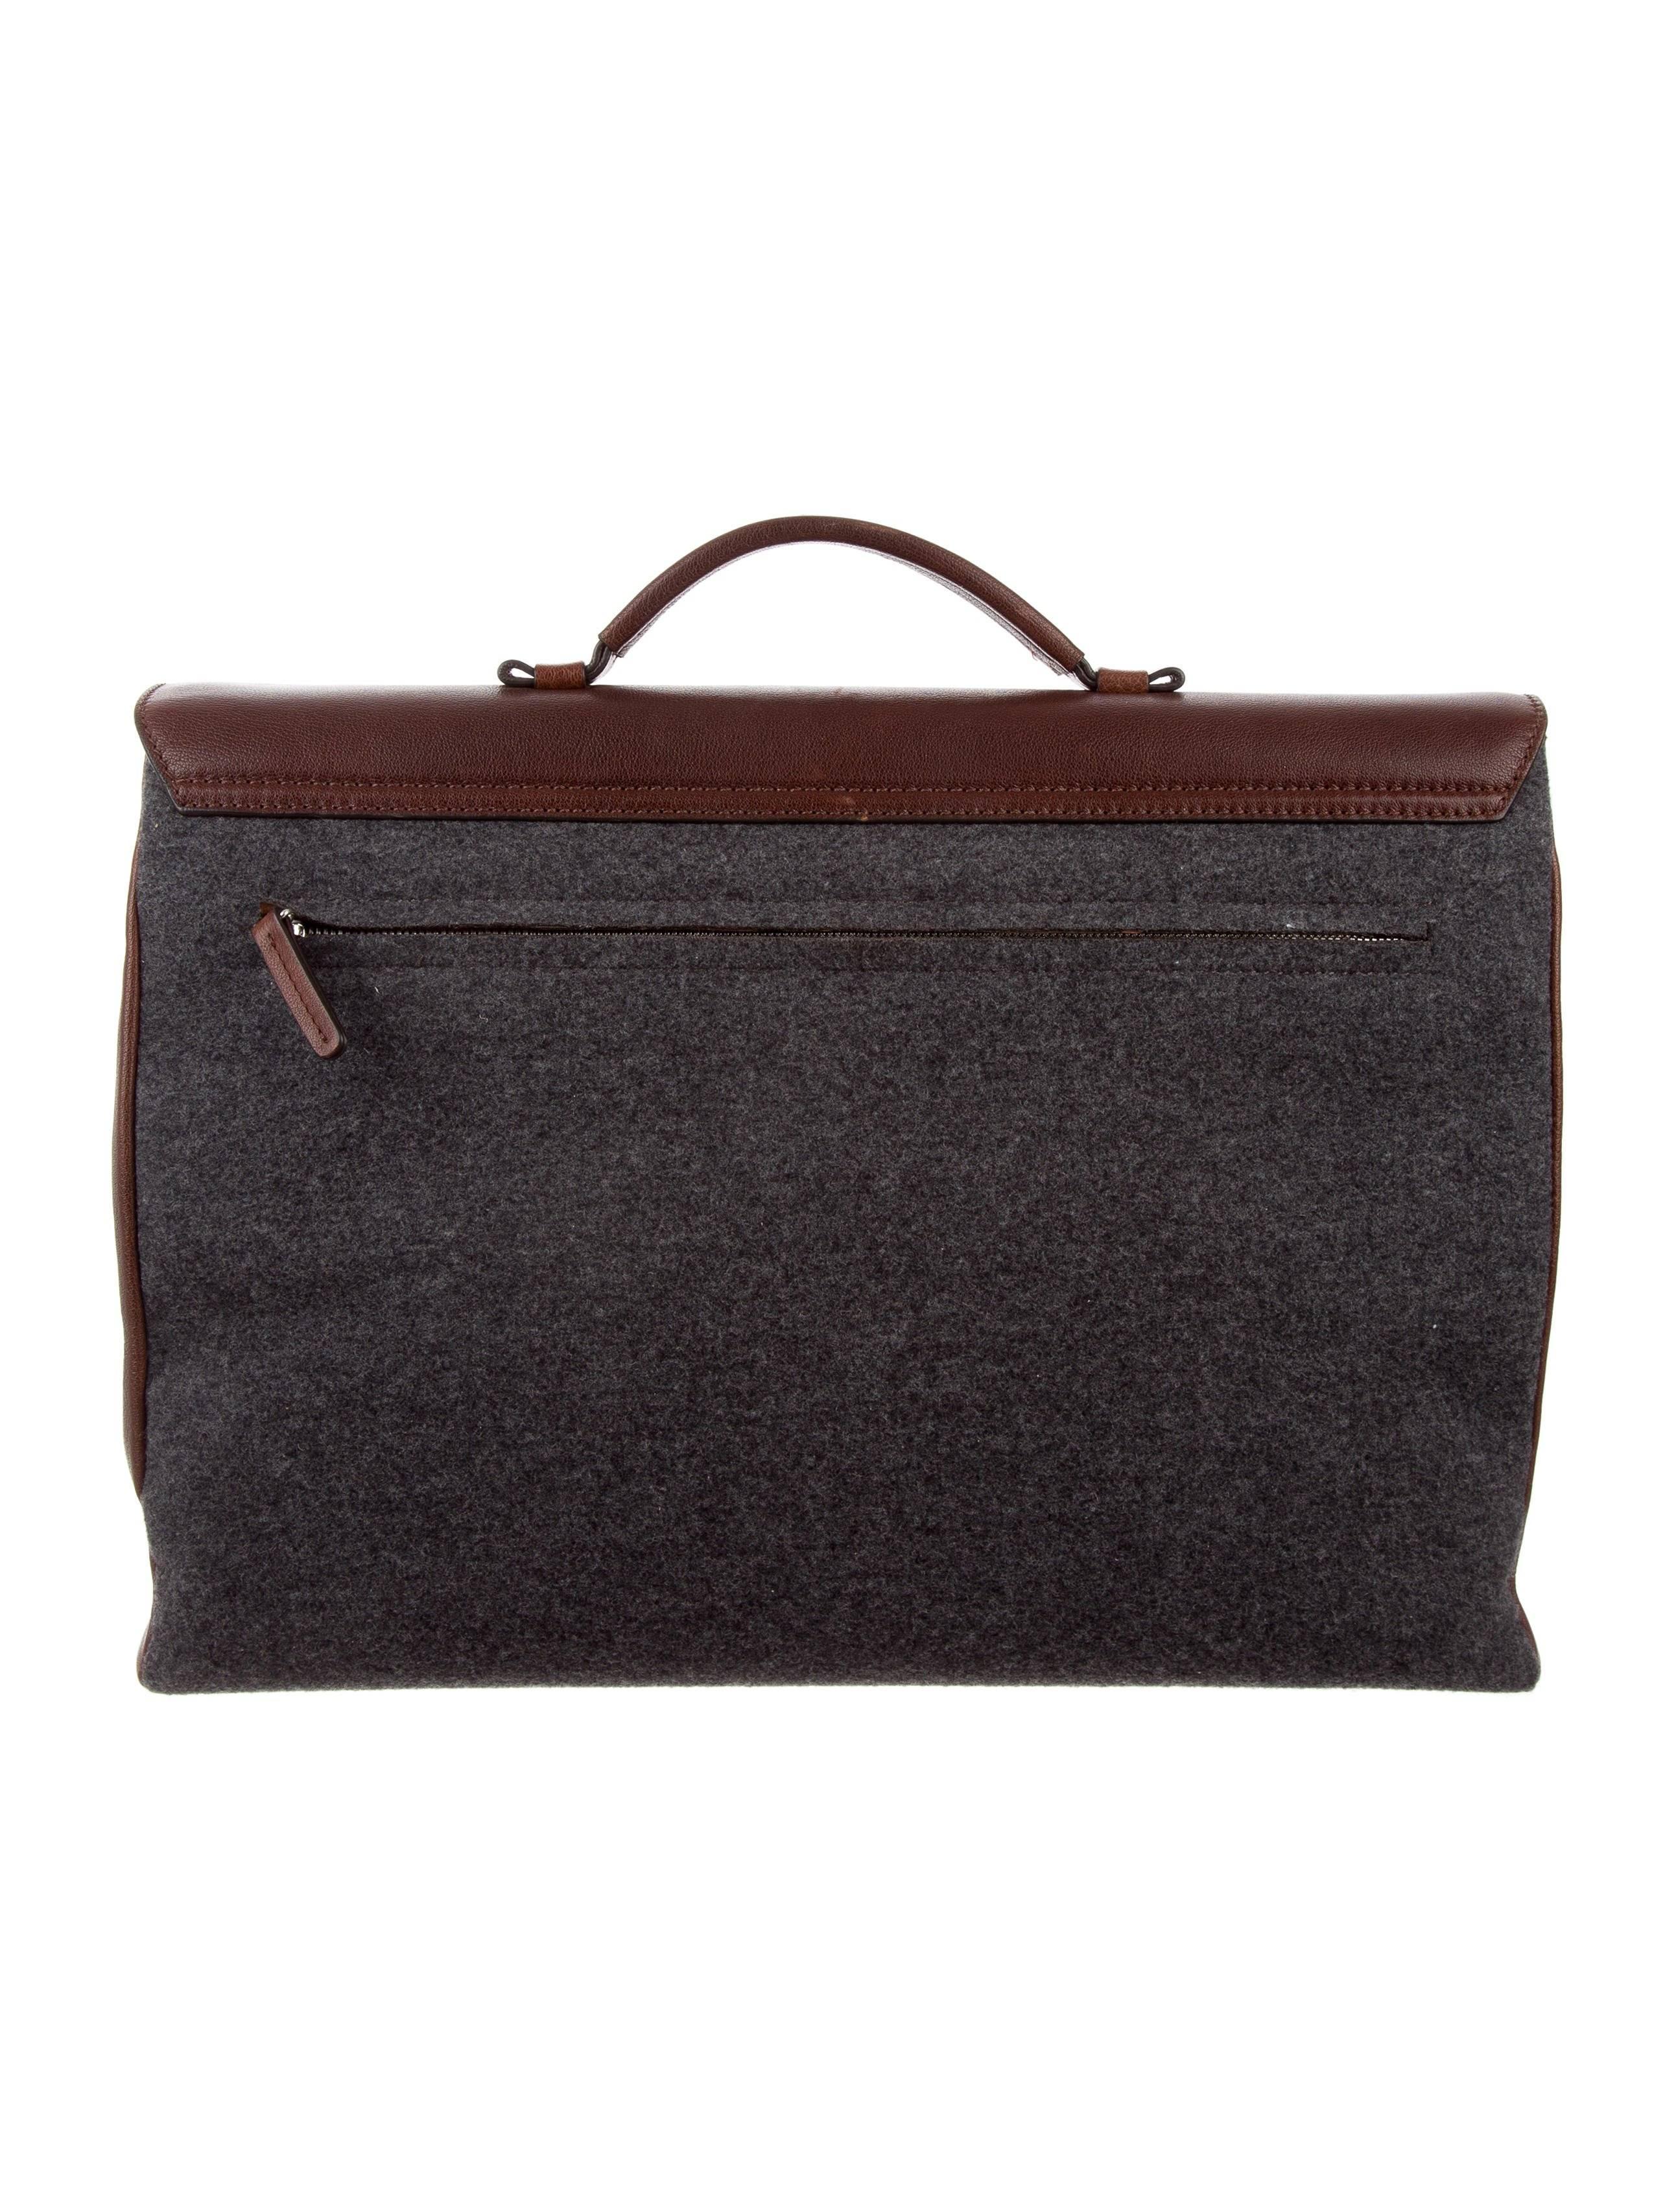 CURATOR'S NOTES

Brunello Cucinelli New Leather Cognac Wool Men's Travel Business BriefCase Tote Bag

Original purchase price $4,295
Leather
Wool
Canvas lining
Push lock closure
Made in Italy
Handle drop 2"
Measures 16.5" W x 13" H x